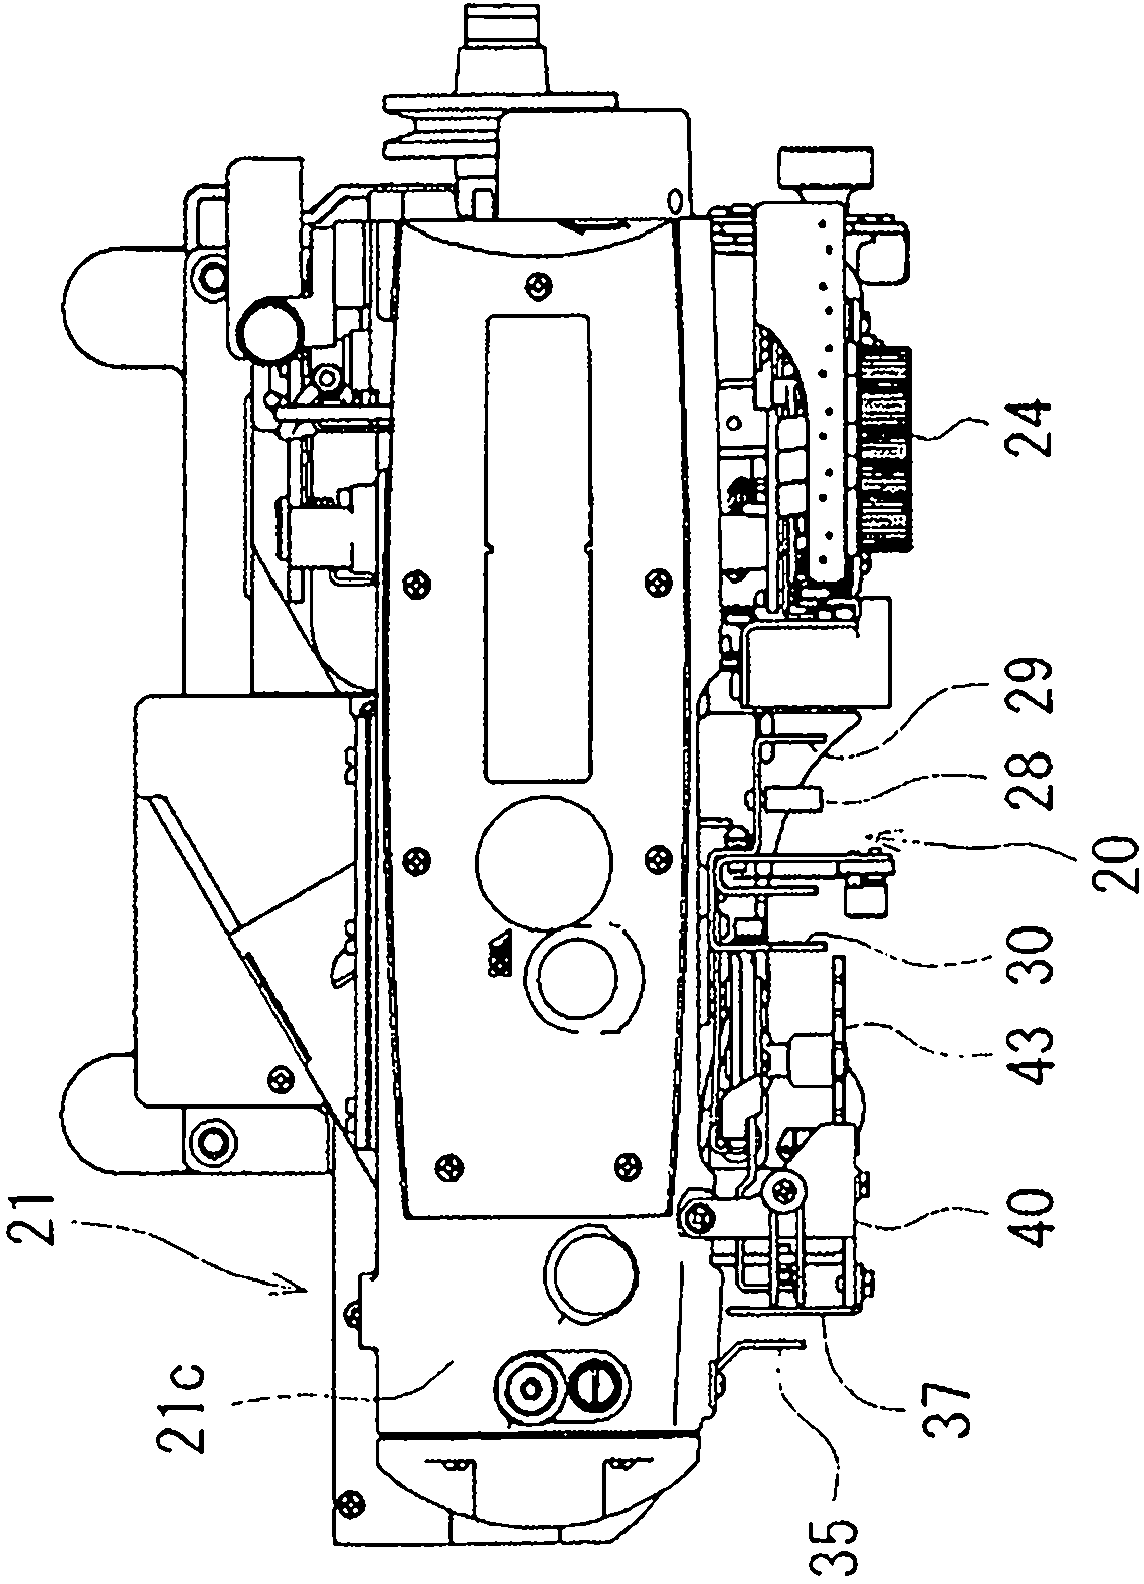 Wire feeding device of sewing machine